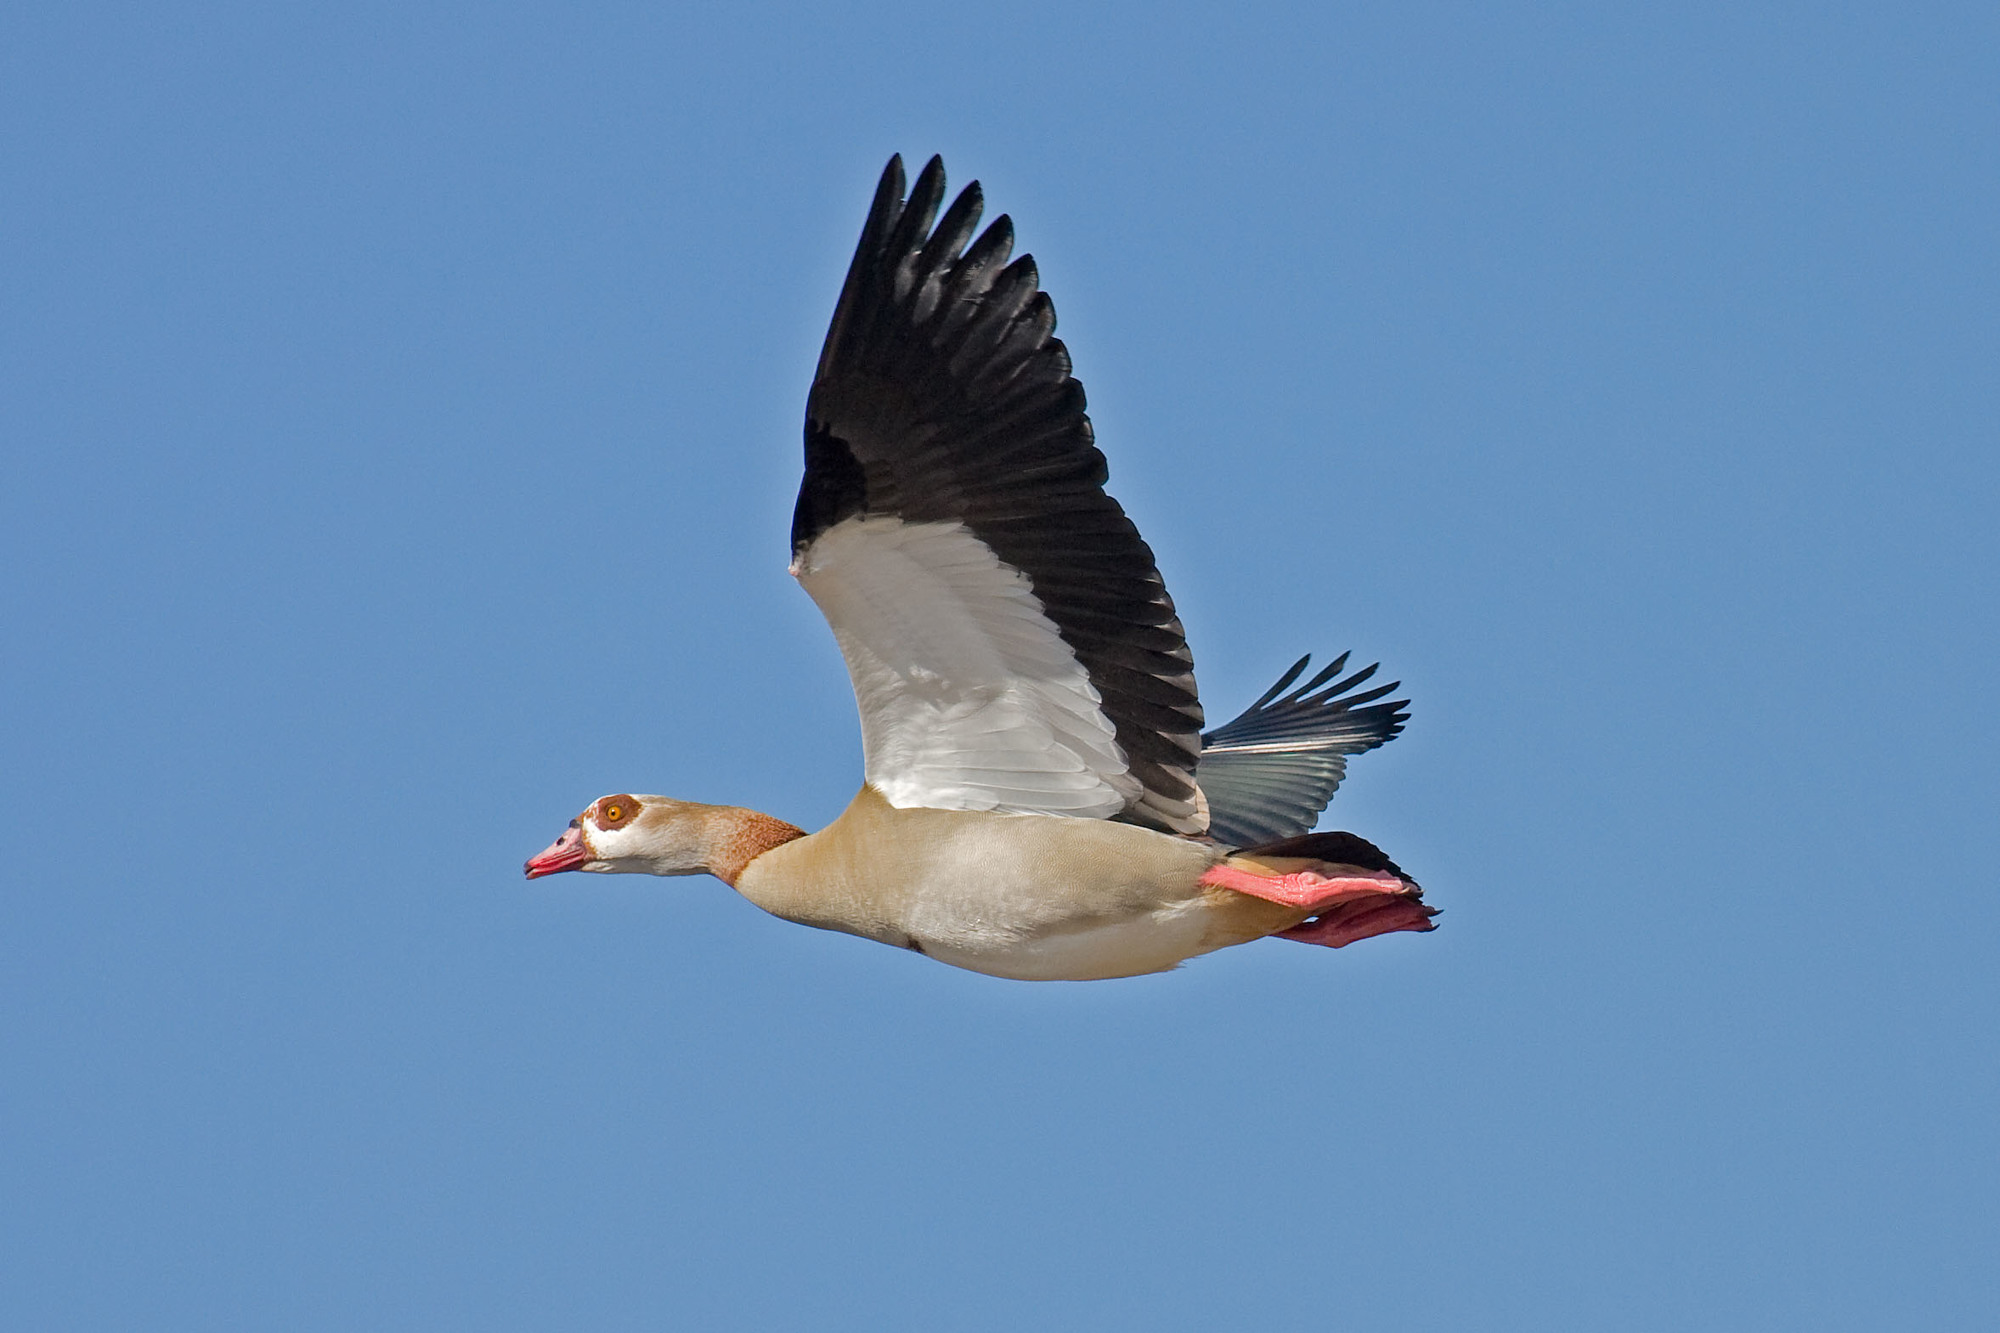 Not actually a goose, but a relative of the shelducks, the Egyptian goose is considered a pest in its native and adopted ranges. Photo courtesy of Wikimedia Commons